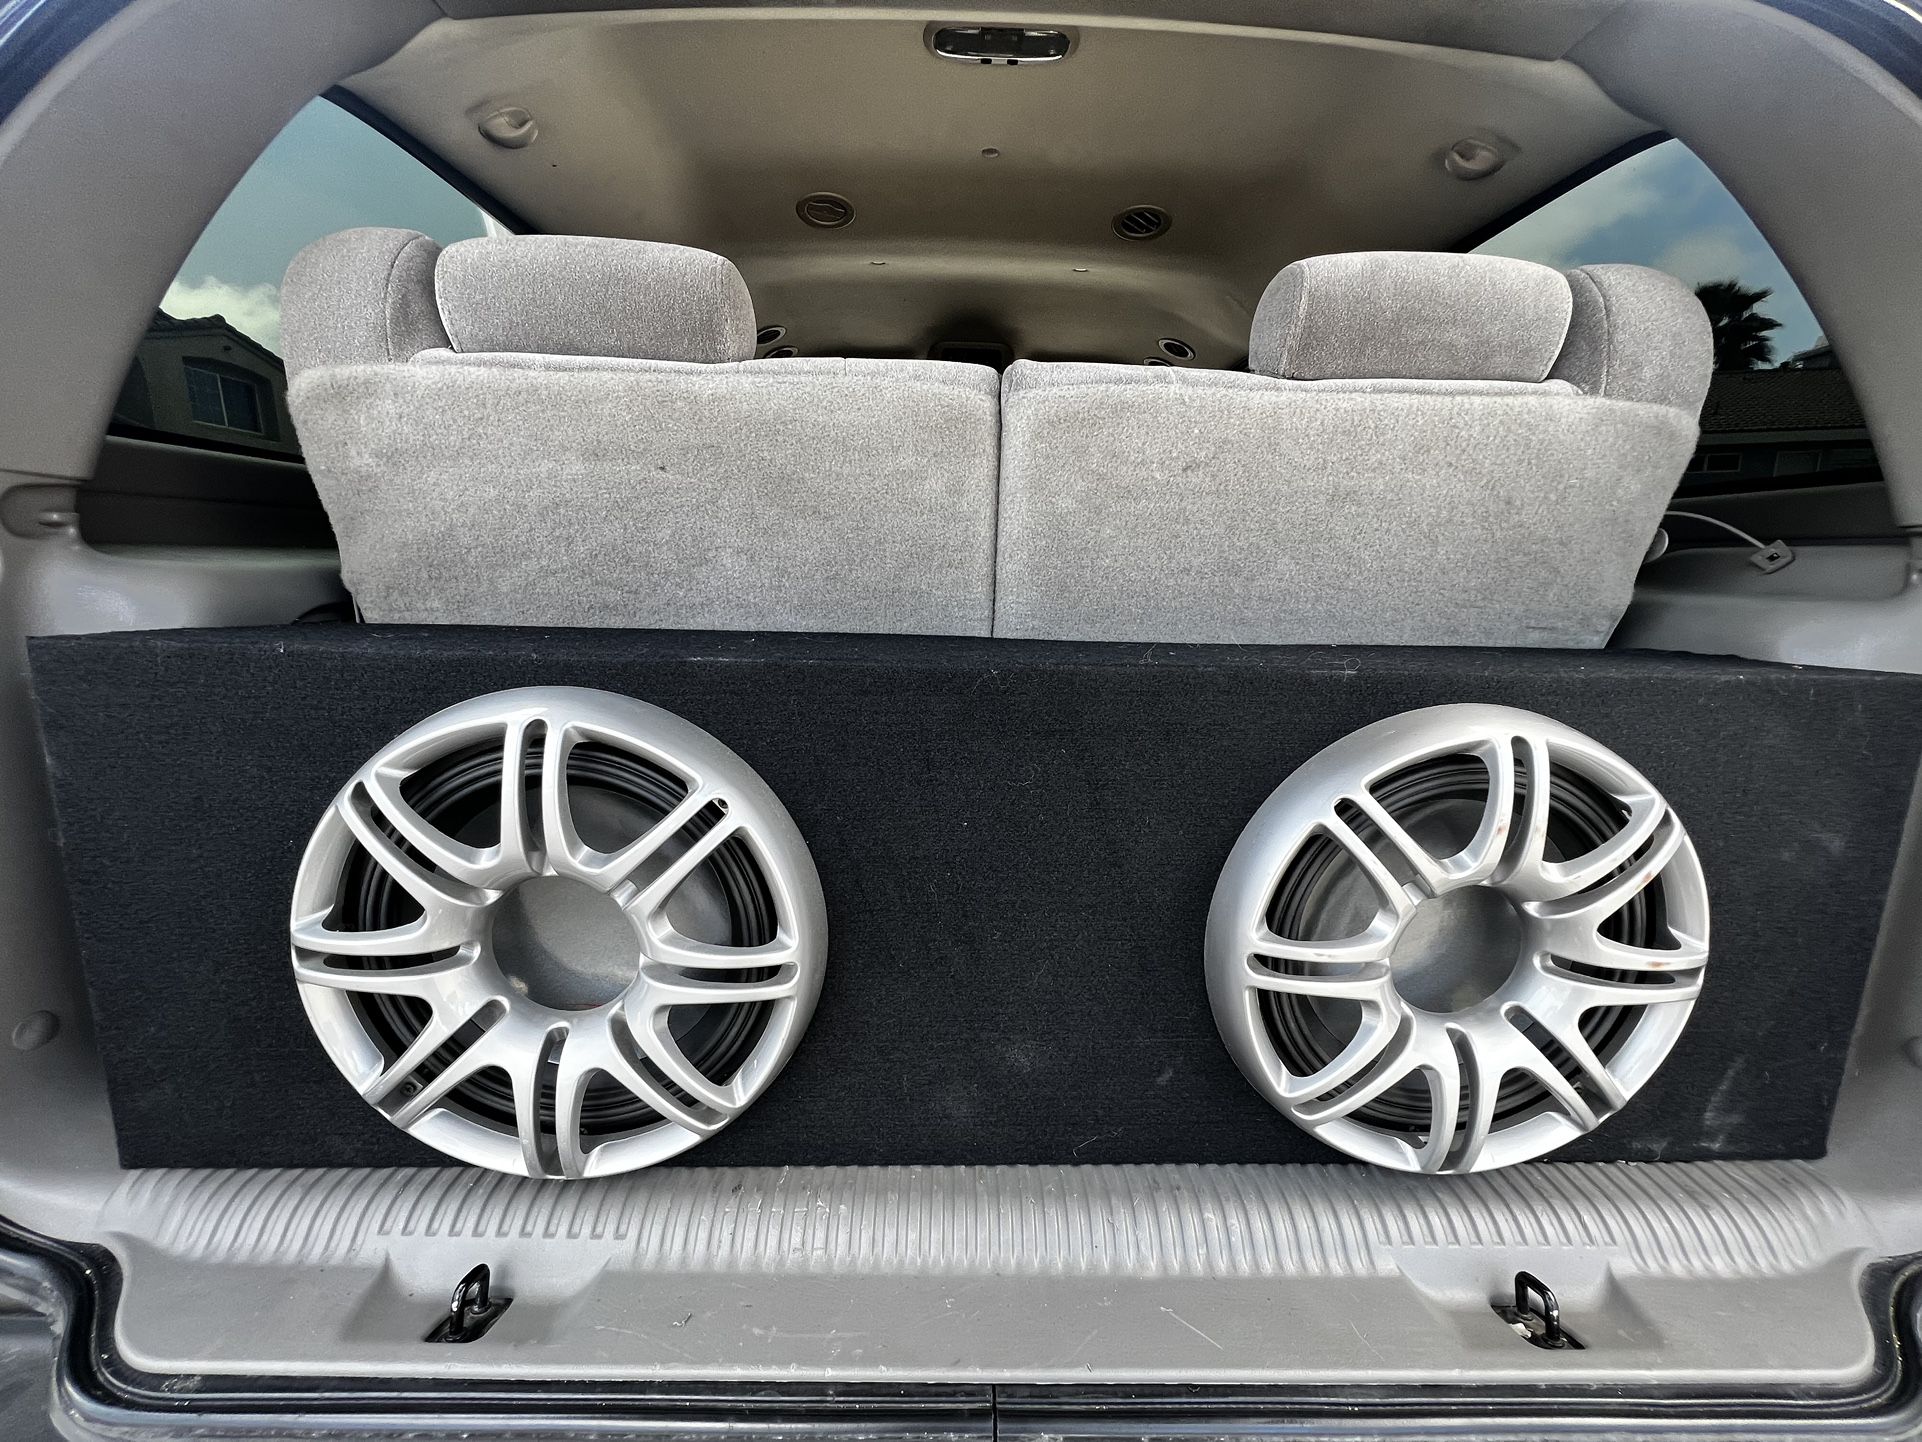 2 12 Subwoofer And Amp